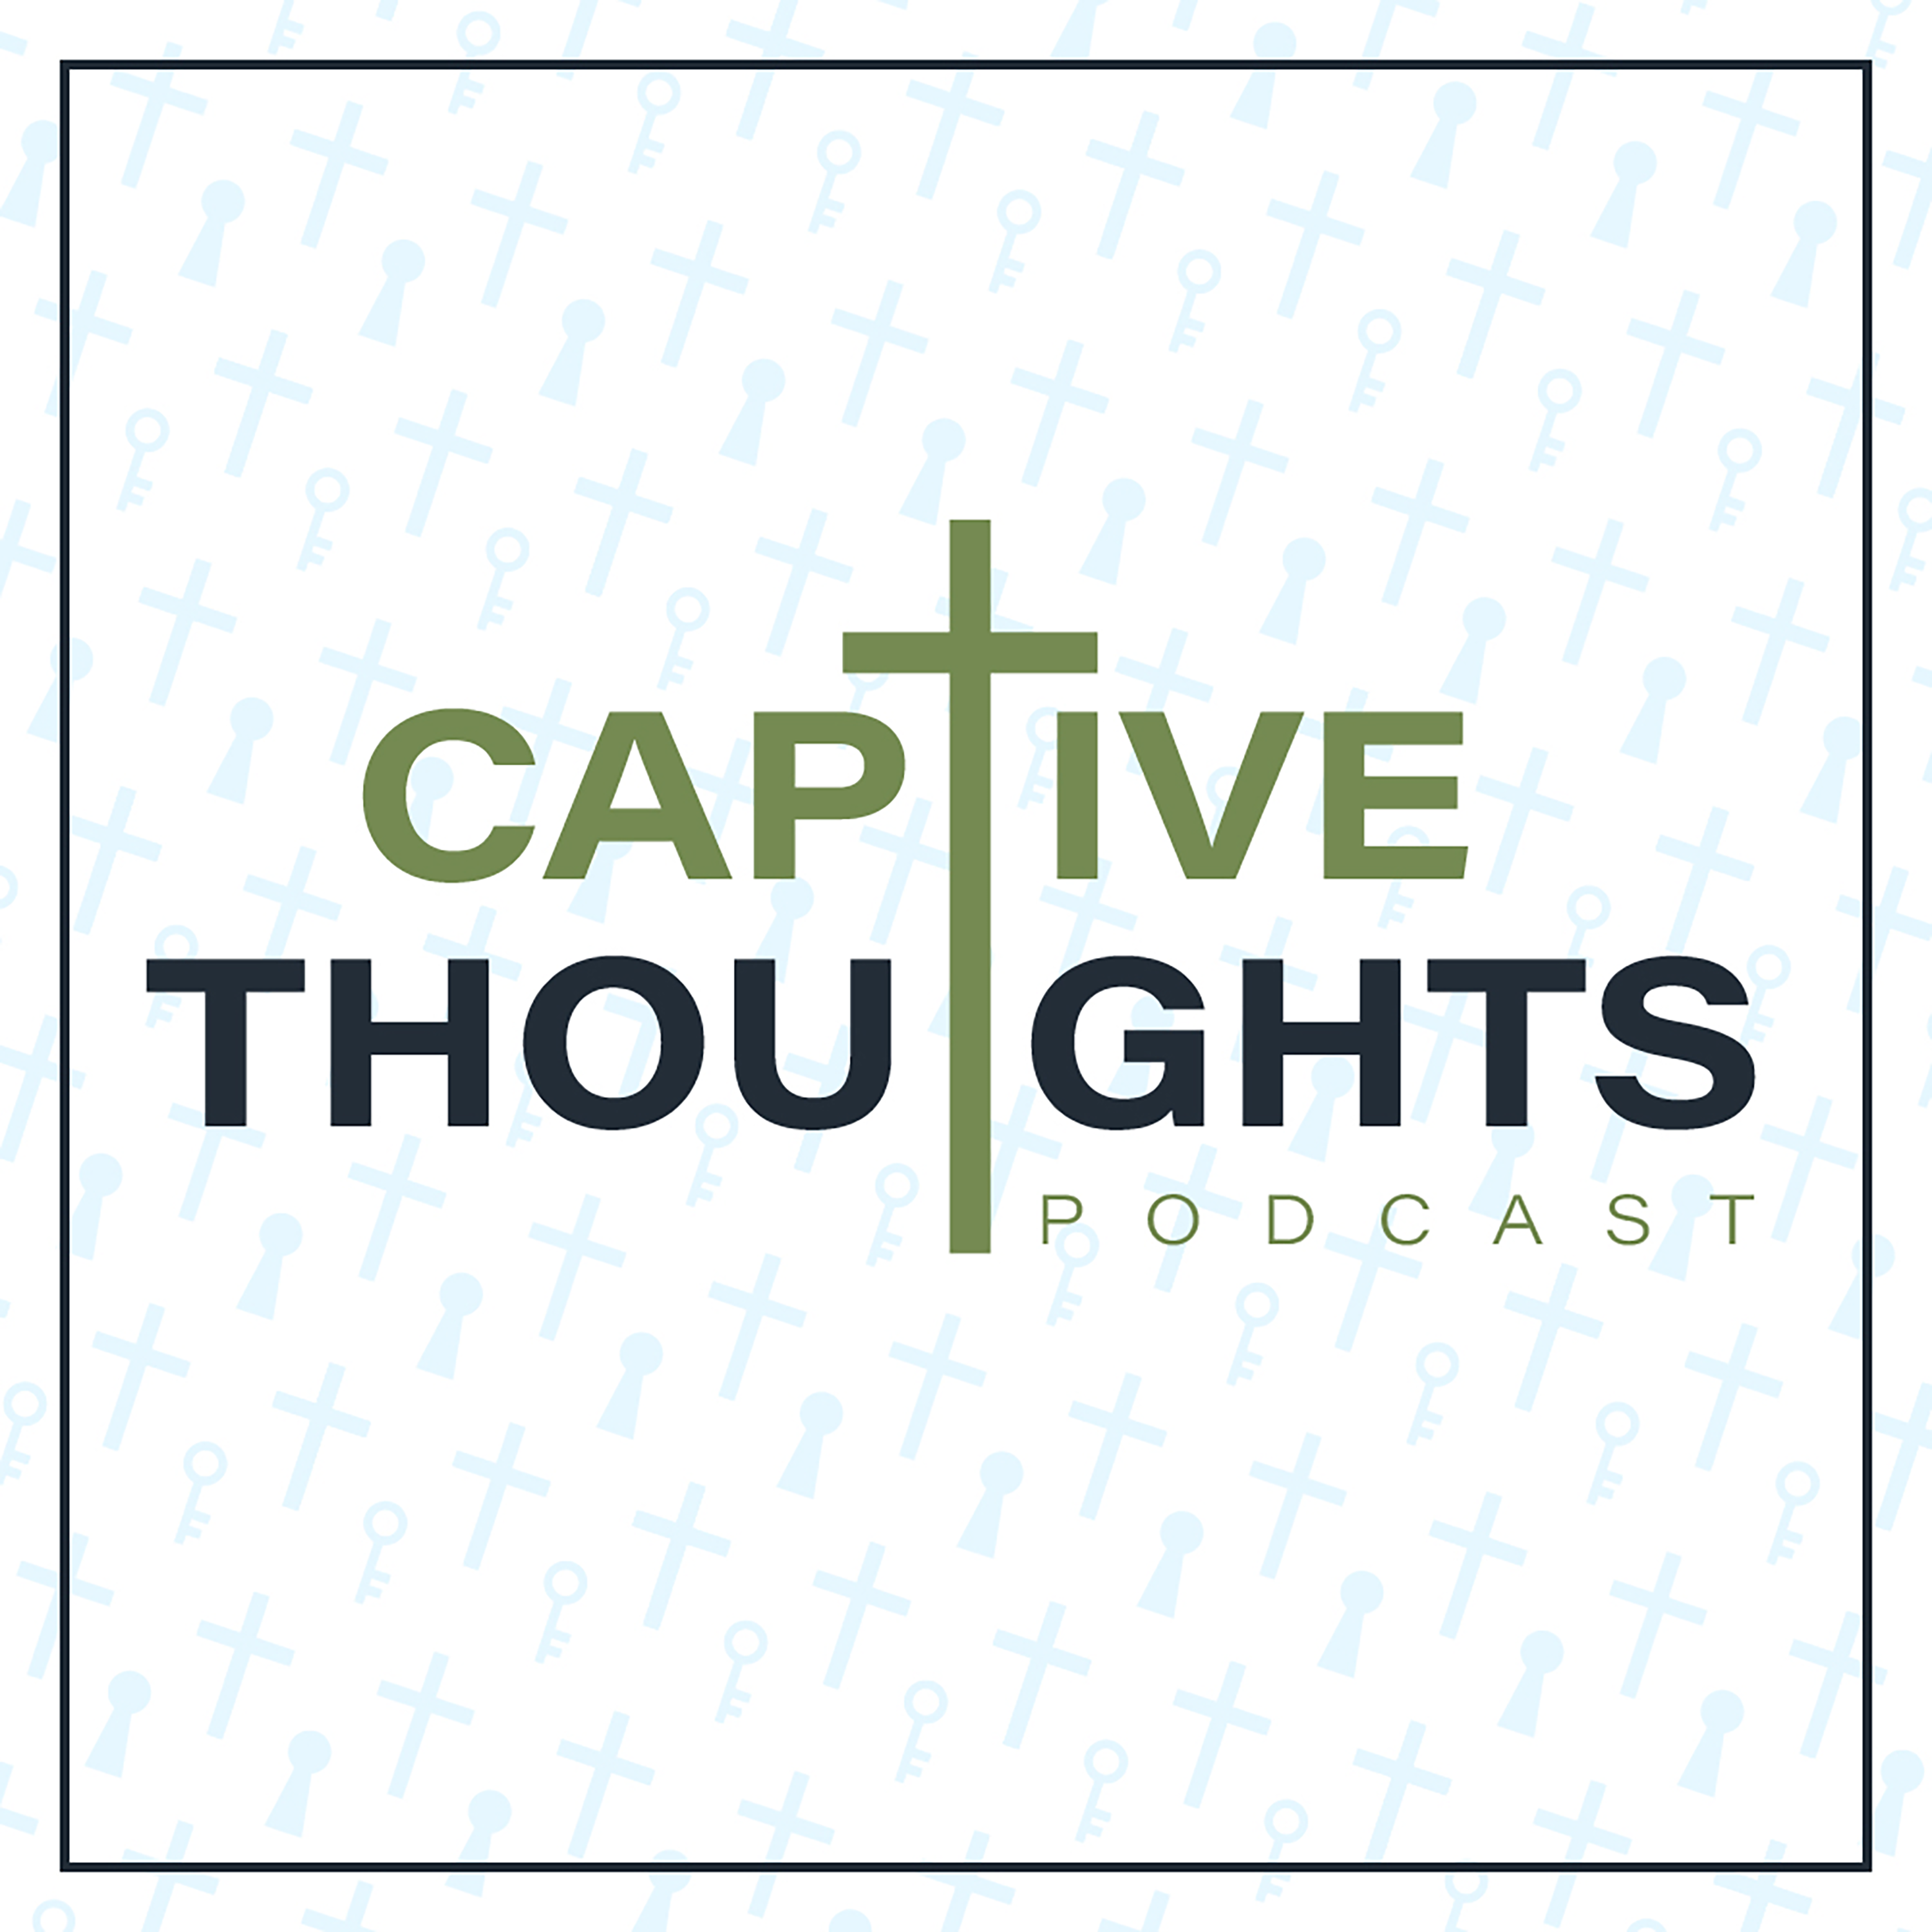 Captive Thoughts Podcast